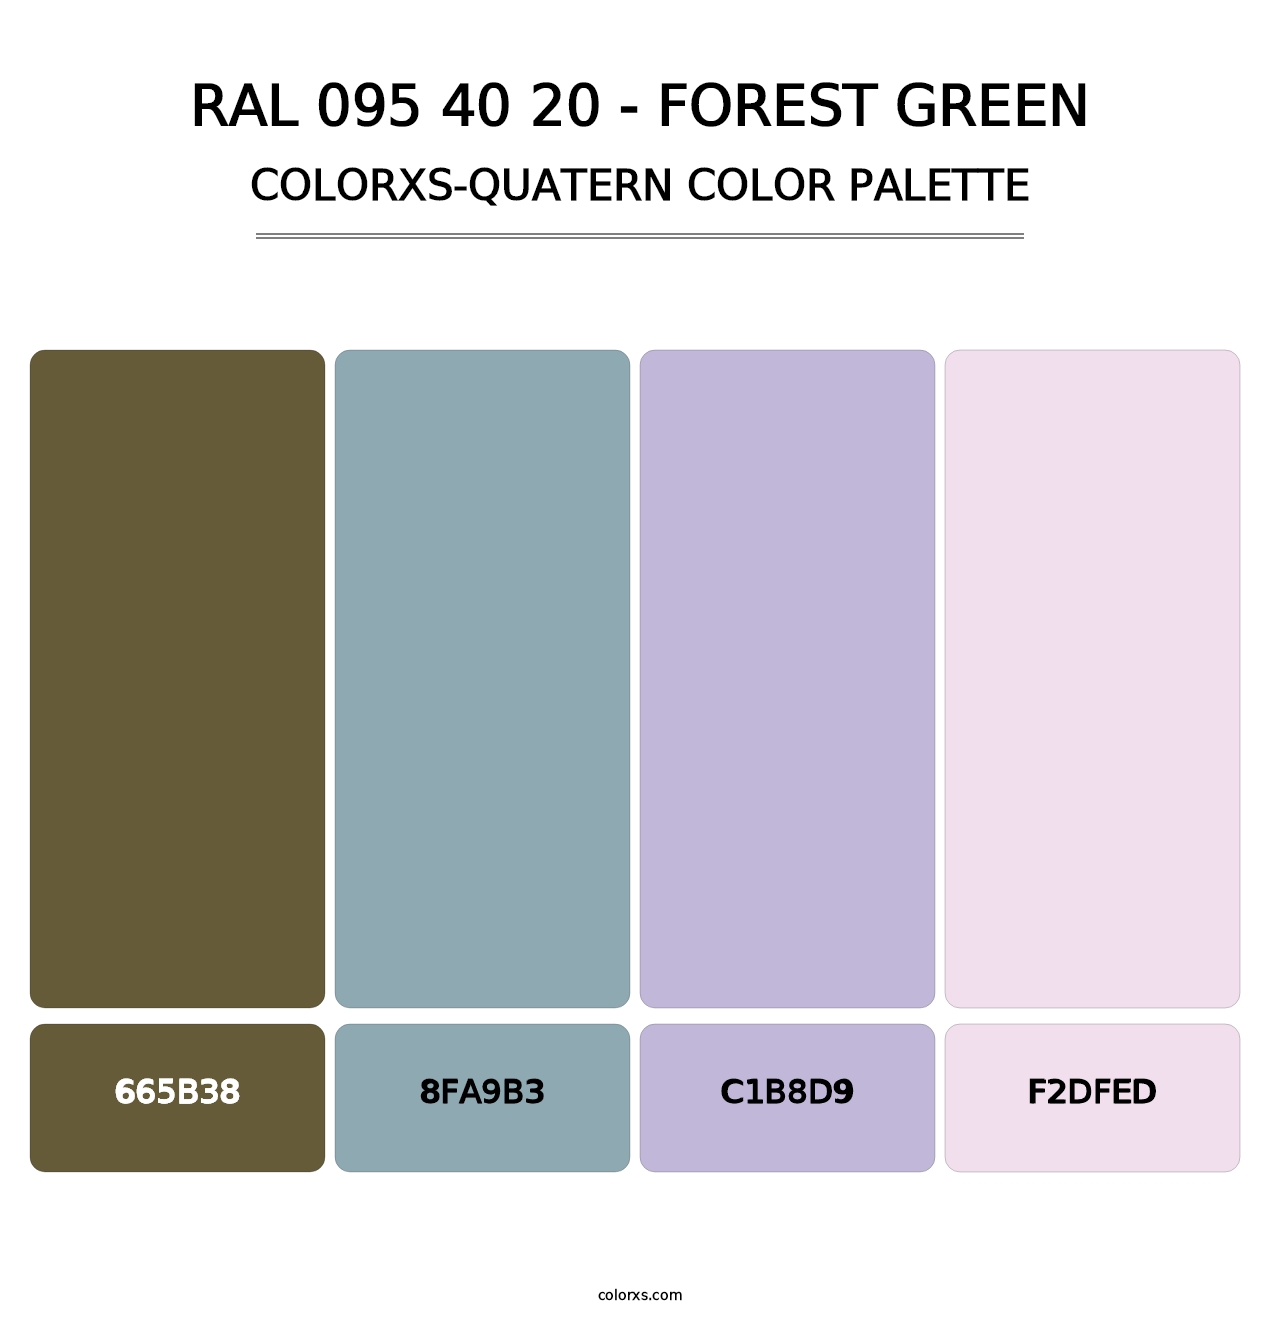 RAL 095 40 20 - Forest Green - Colorxs Quatern Palette